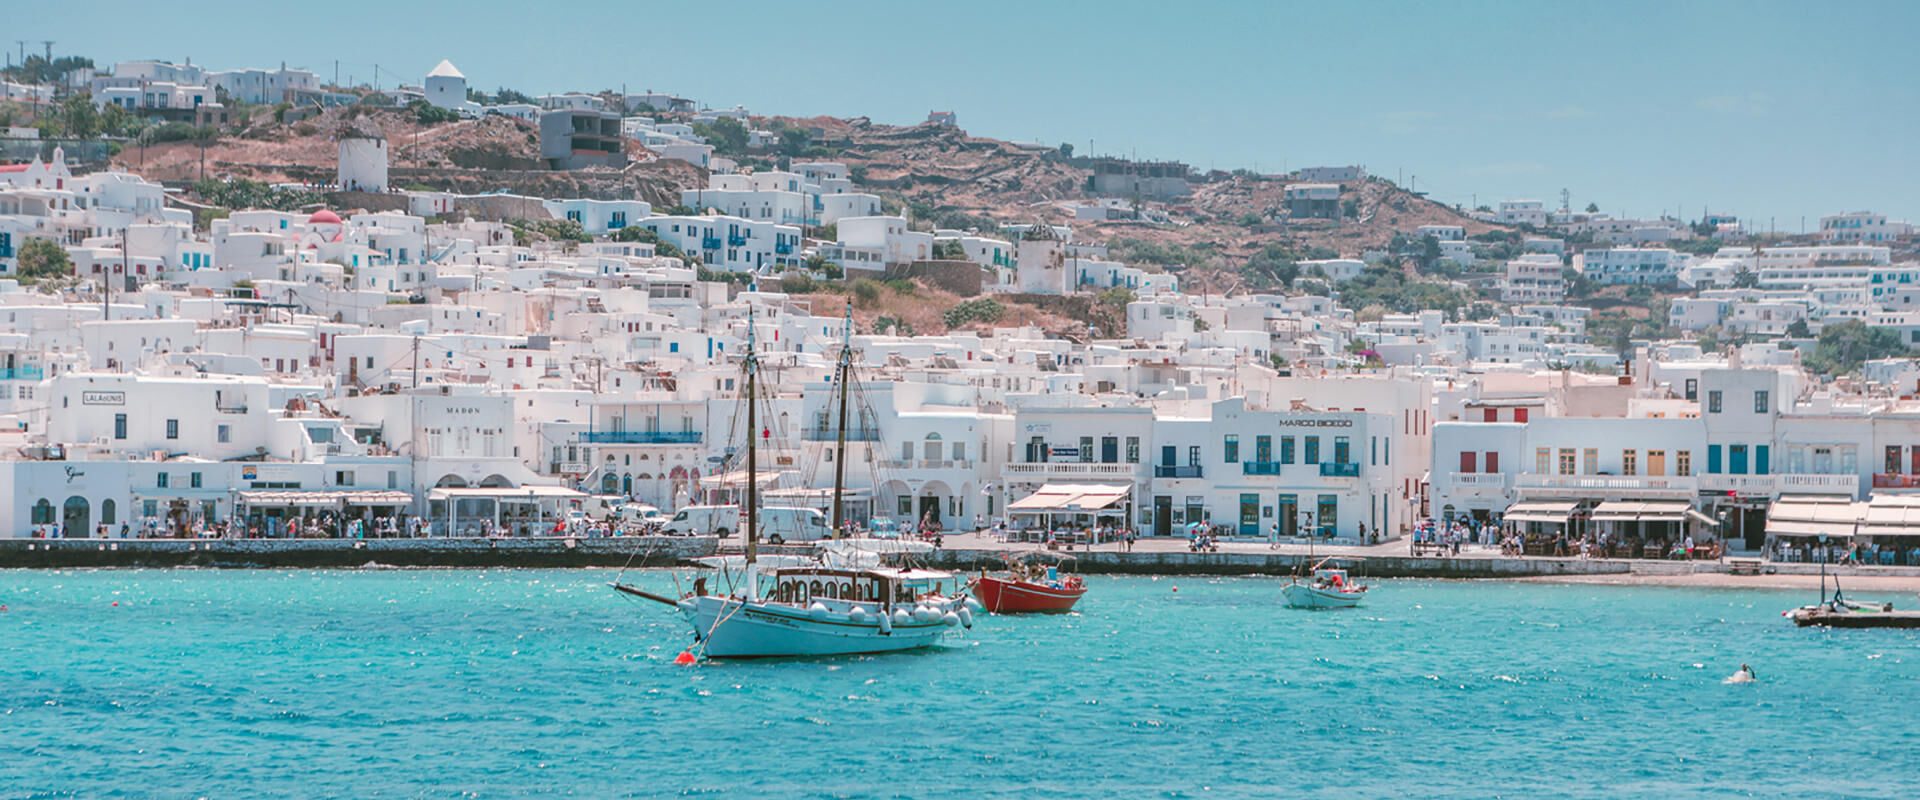 The Instagrammable beauty of Mykonos’ main town beats a strong, authentic heart that you’ll adore discovering